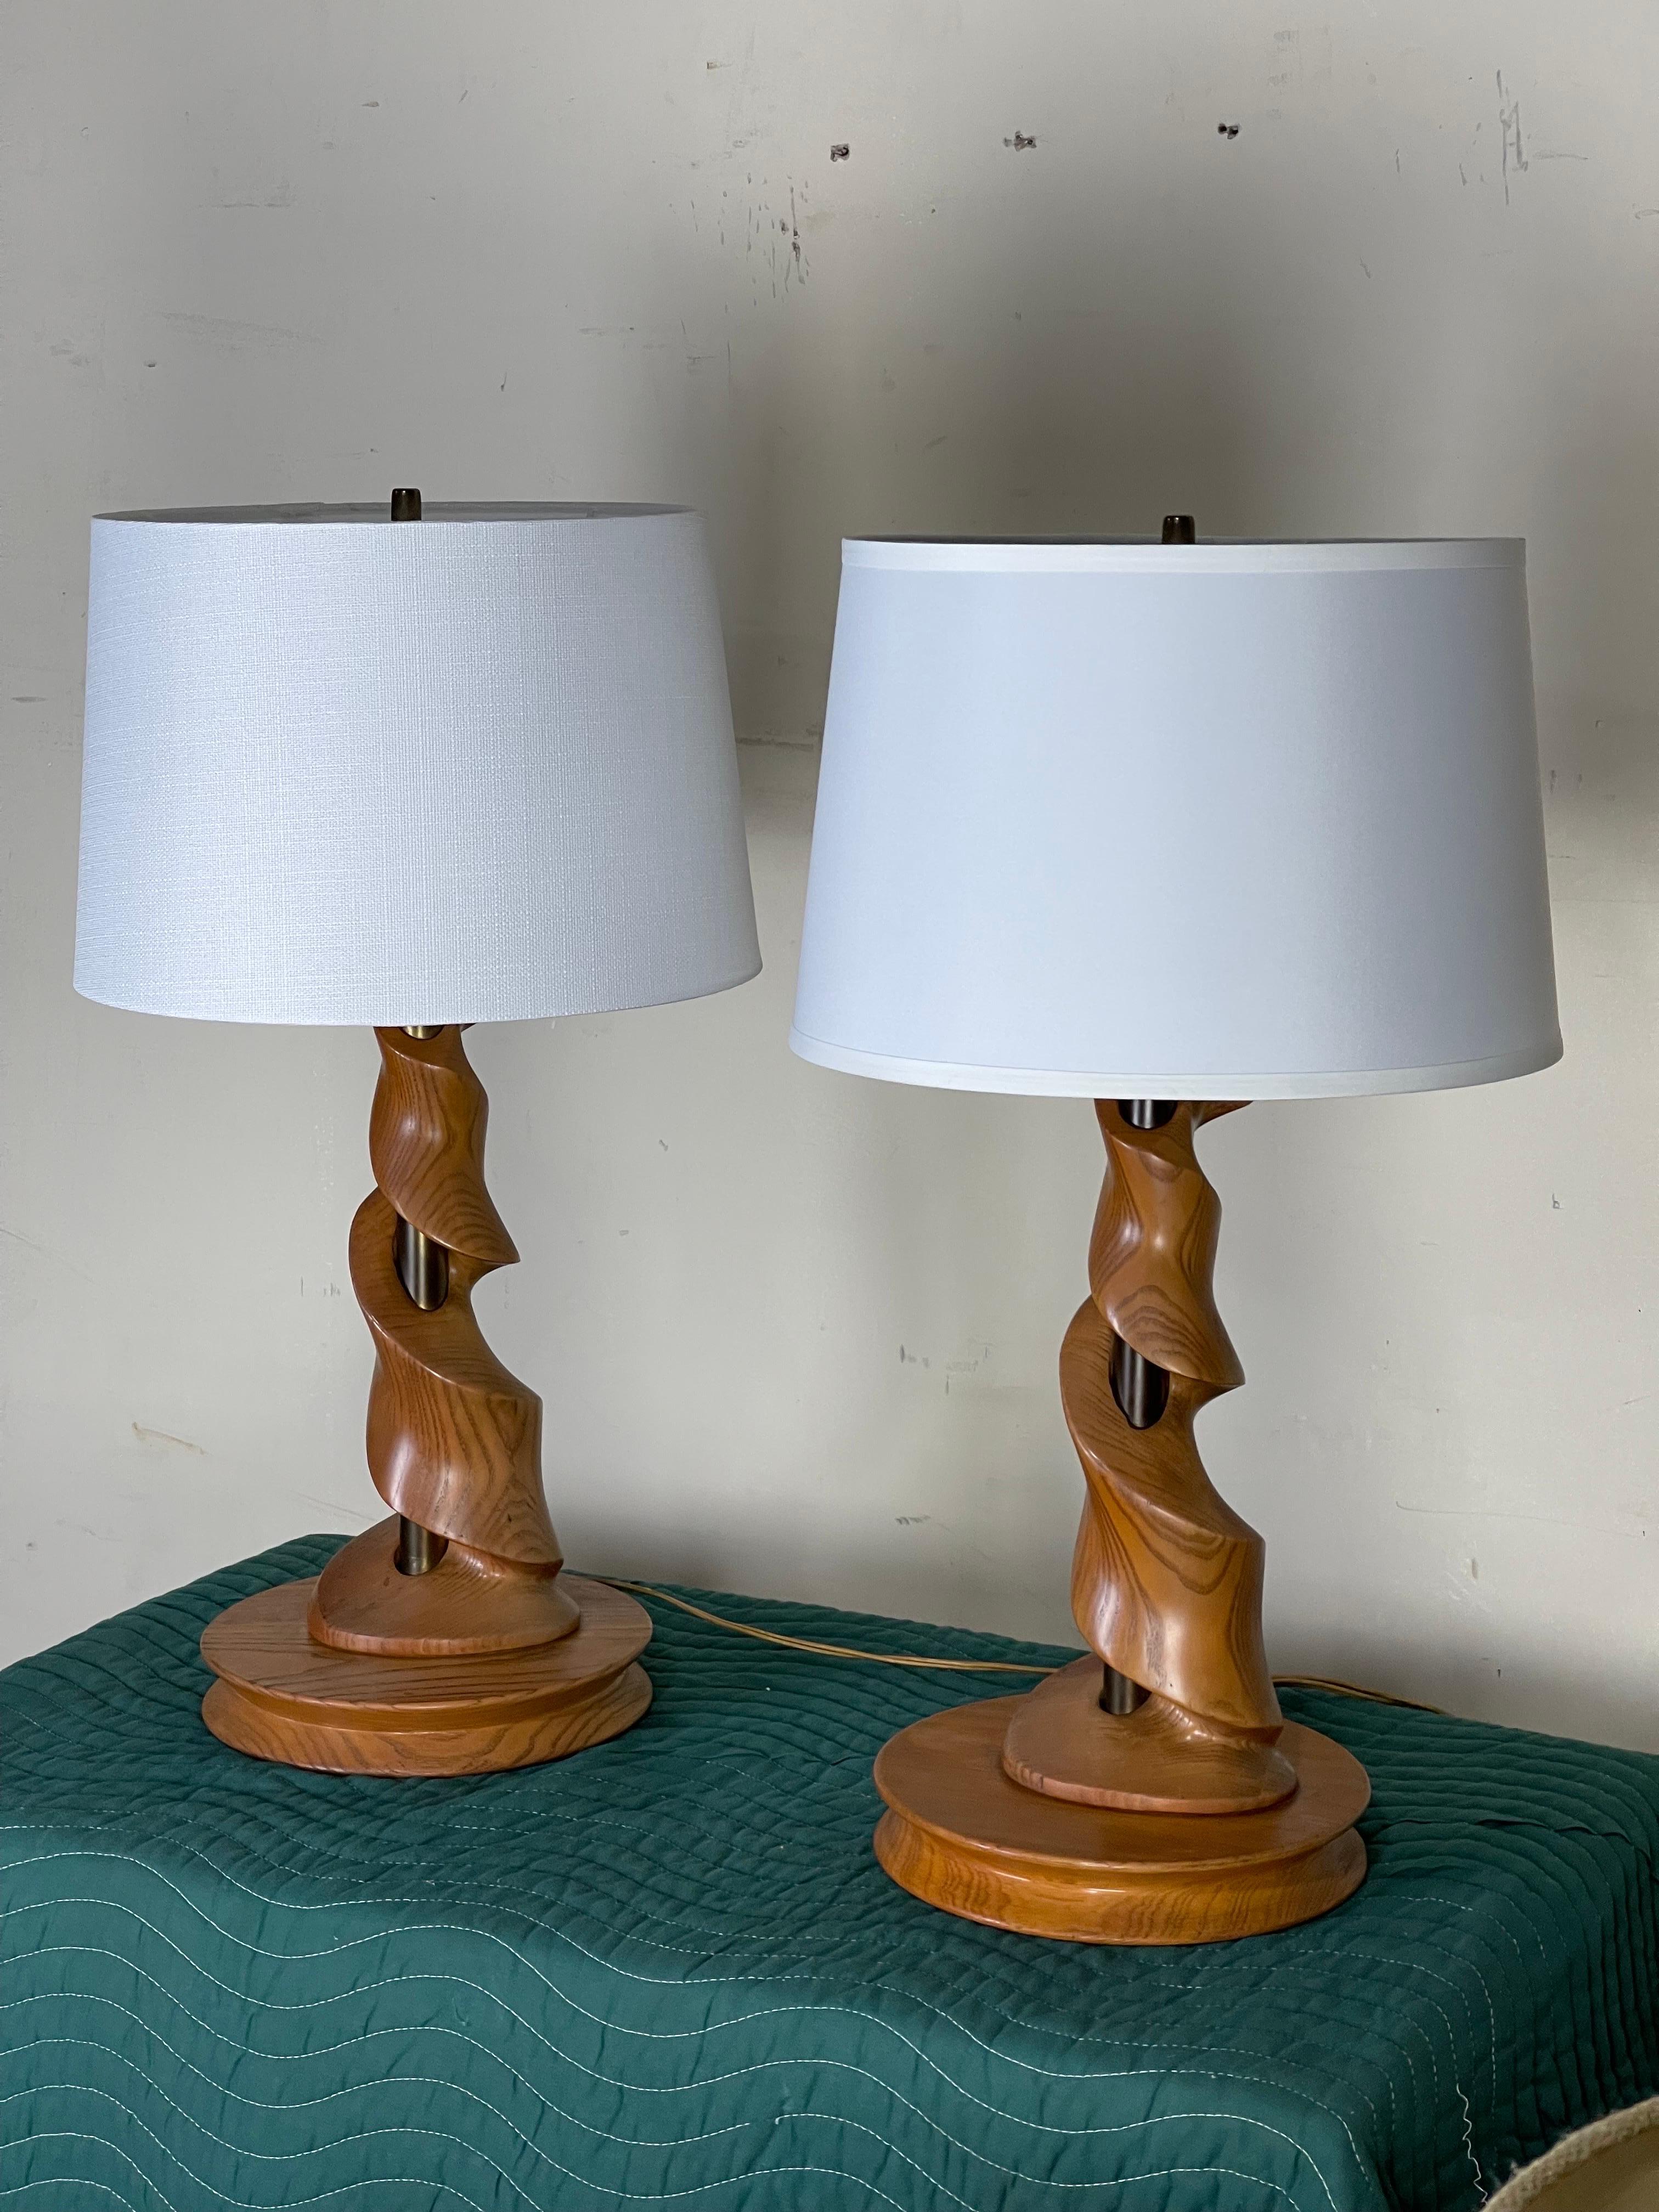 Incredible pair of table lamps by Light House Lamp Company - 1950’s. Original condition. Great patina and age appropriate wear. Slight separation where wood pieces were joined. Structurally sound. Please see pictures. 
Shades not included.